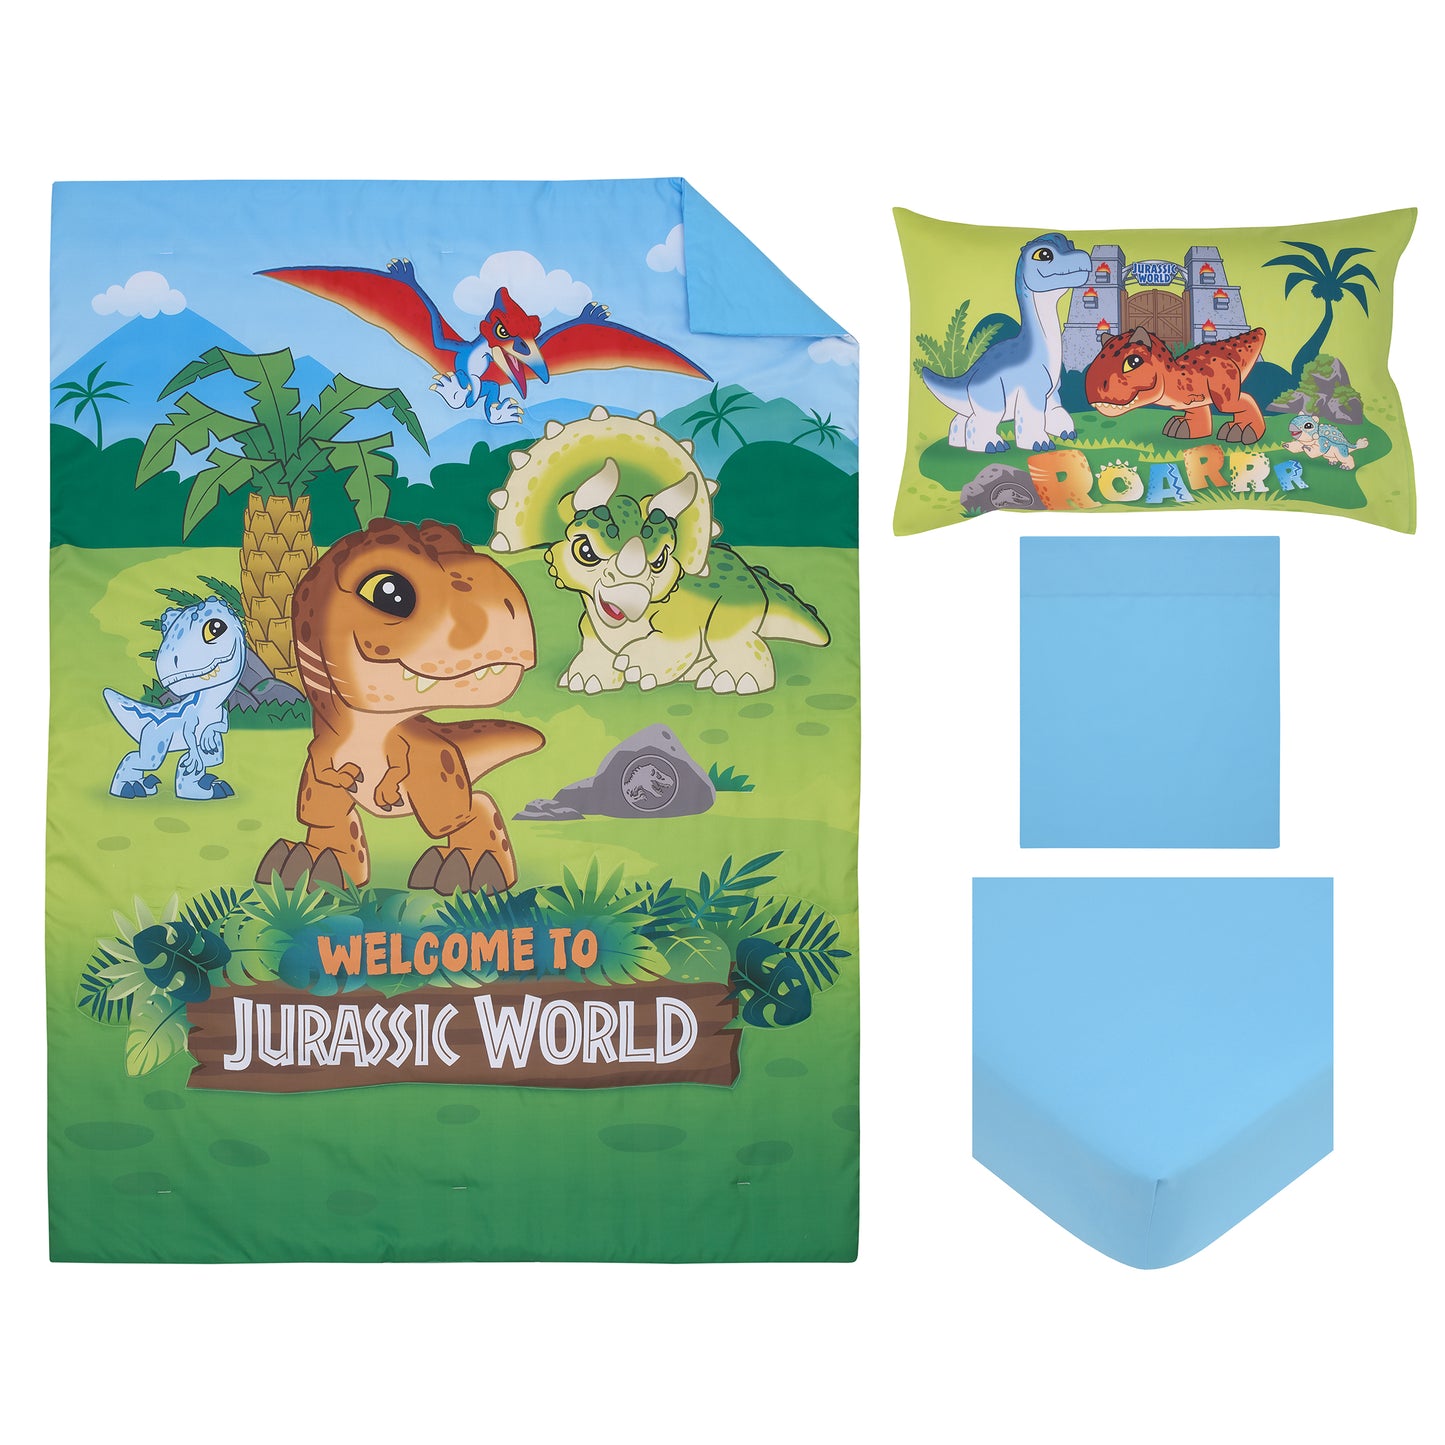 Universal Jurassic World Explorers Welcome to Jurassic World, Green, Blue, and Tan Dinosaur 4 Piece Toddler Bed Set - Comforter, Fitted Bottom Sheet, Flat Top Sheet, and Reversible Pillowcase